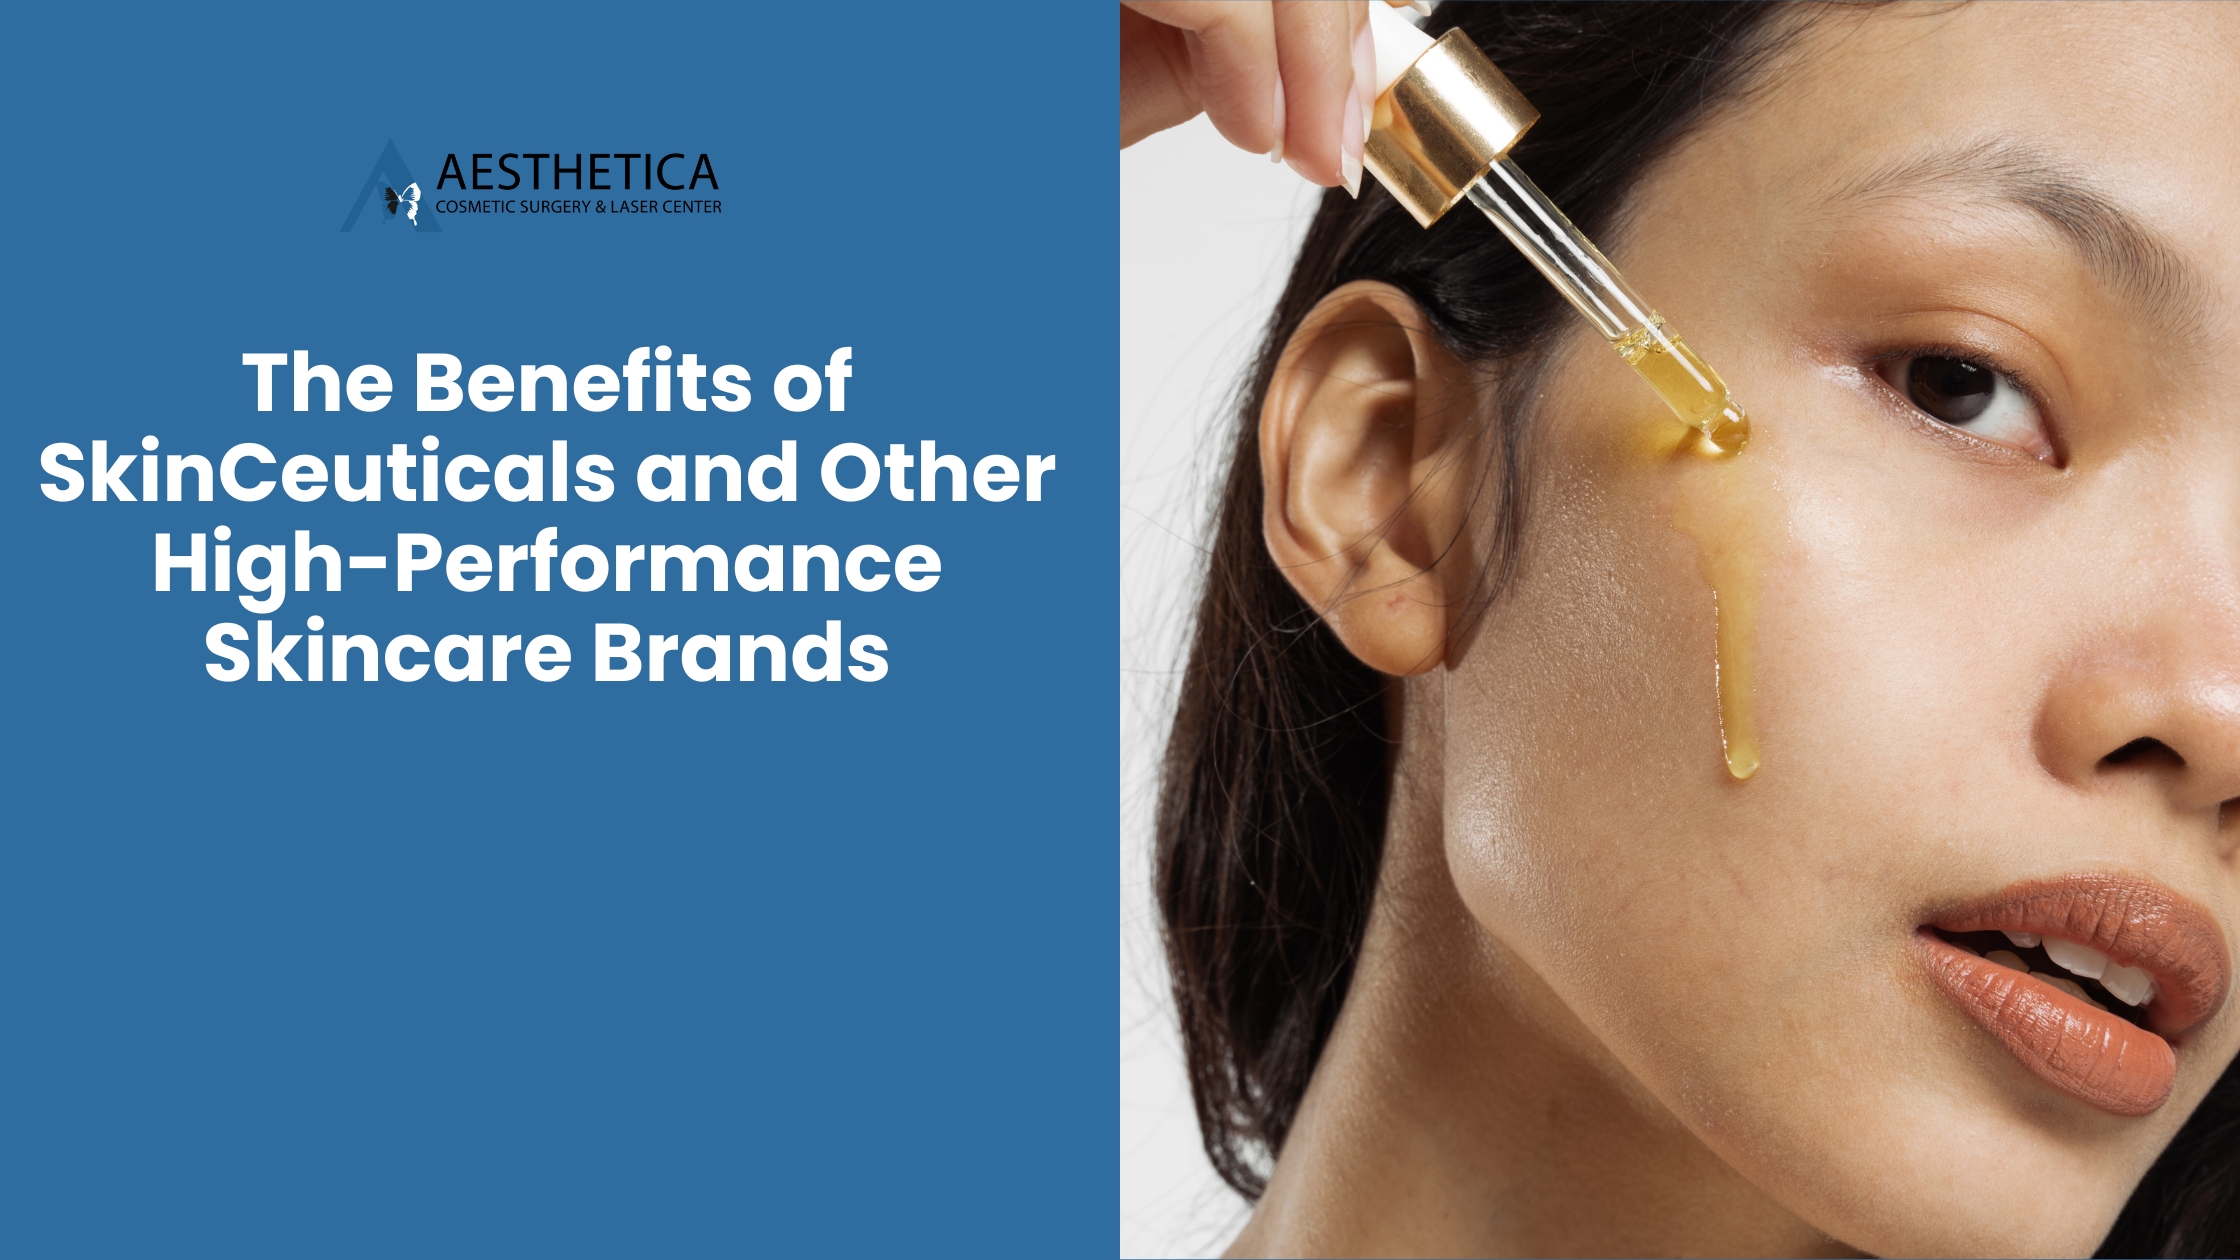 The Benefits of SkinCeuticals and Other High-Performance Skincare Brands